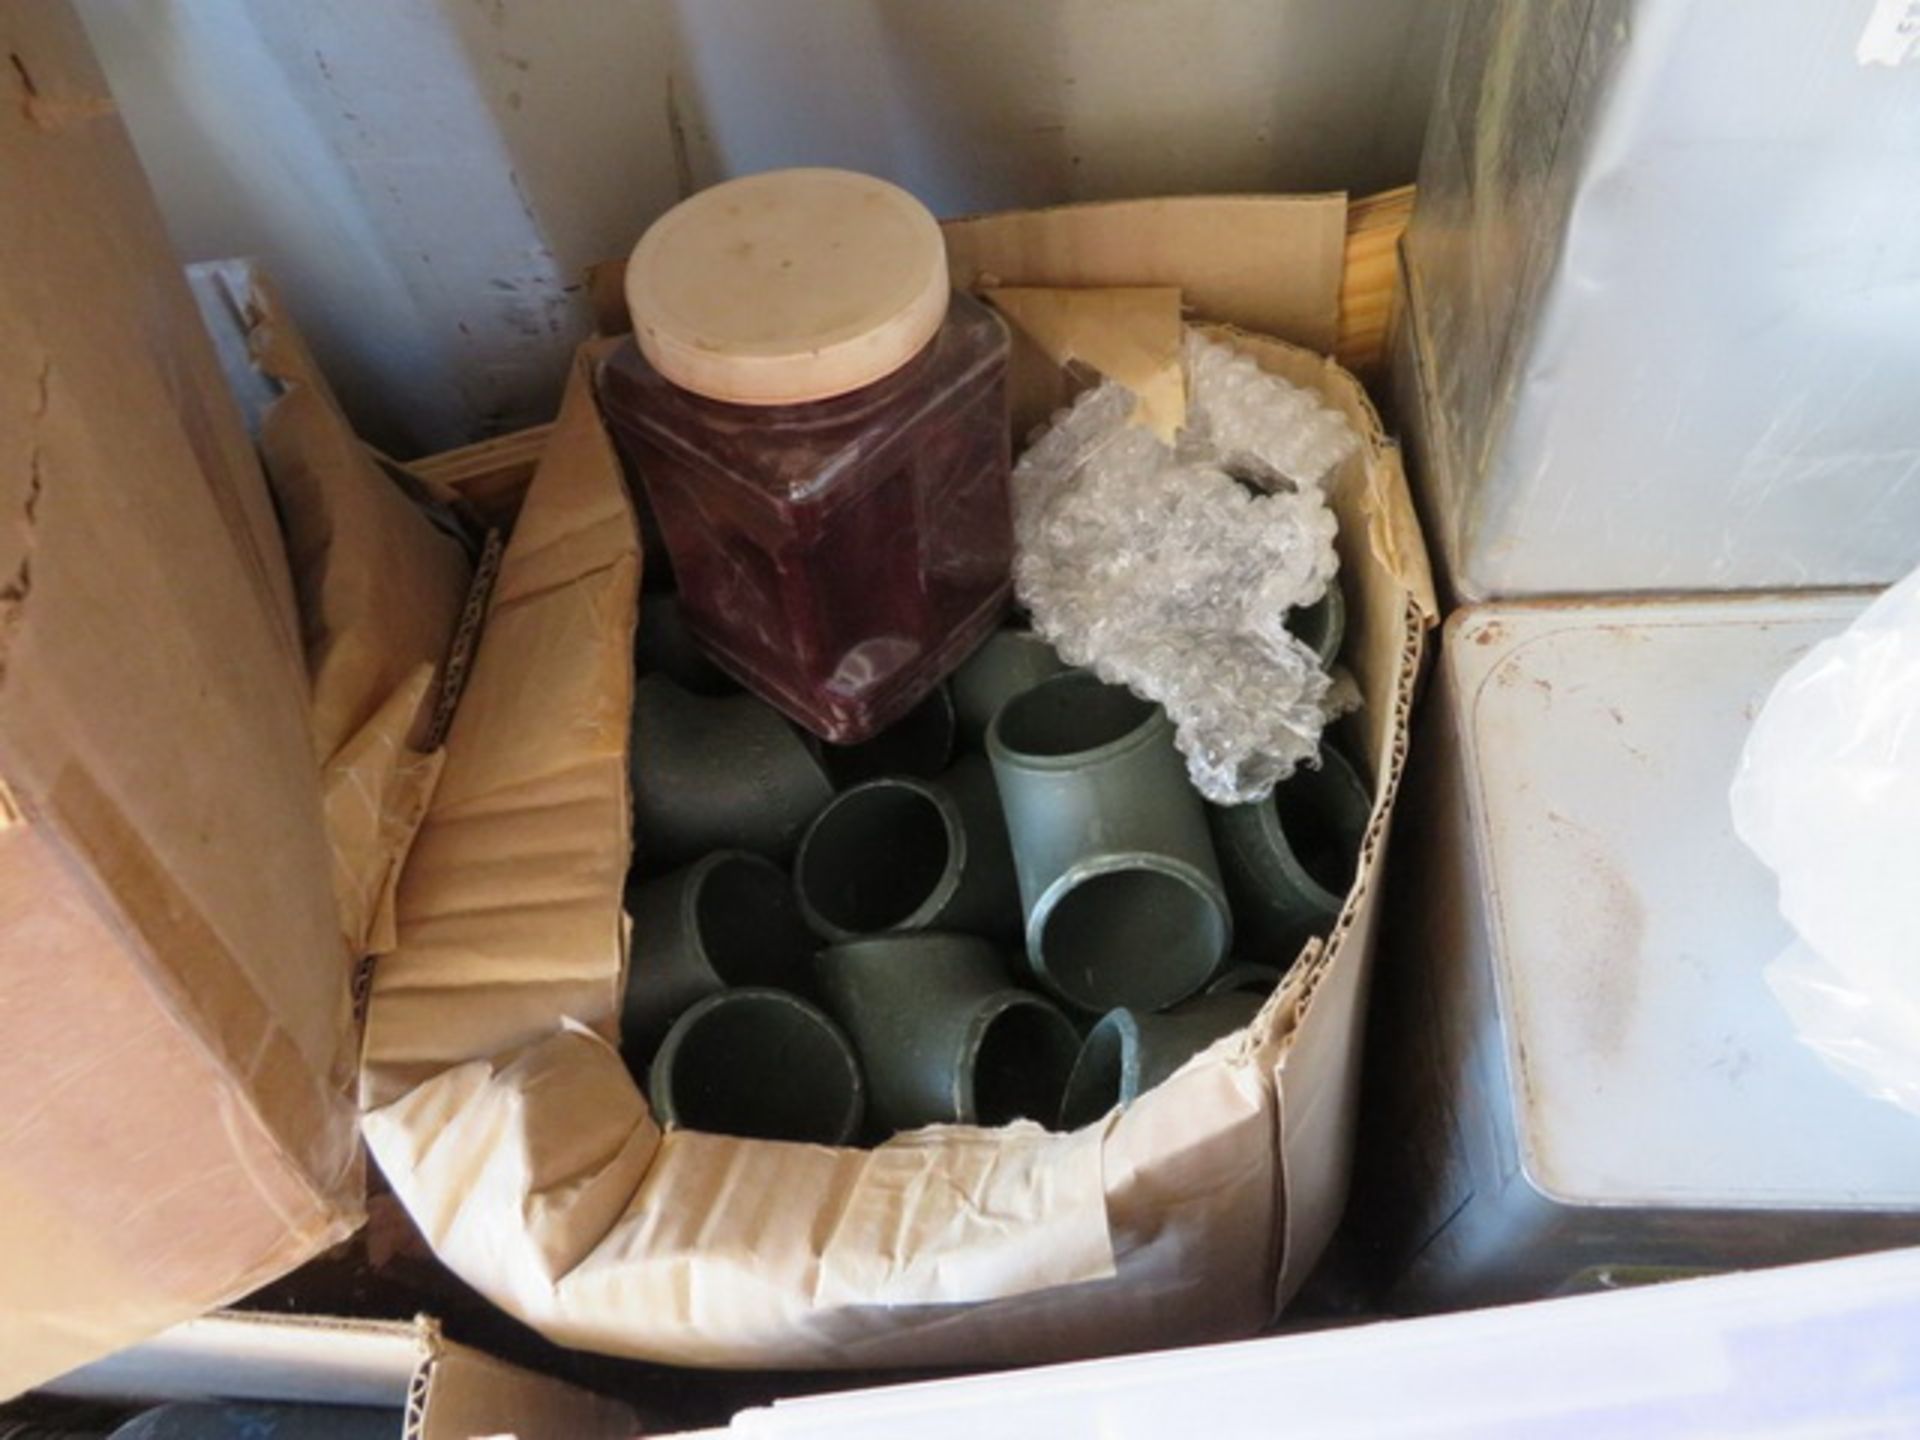 Contents of Shipping Container To Include Face Shields, Blackstone Flap Wheels, Grinding Wheels, - Image 12 of 128